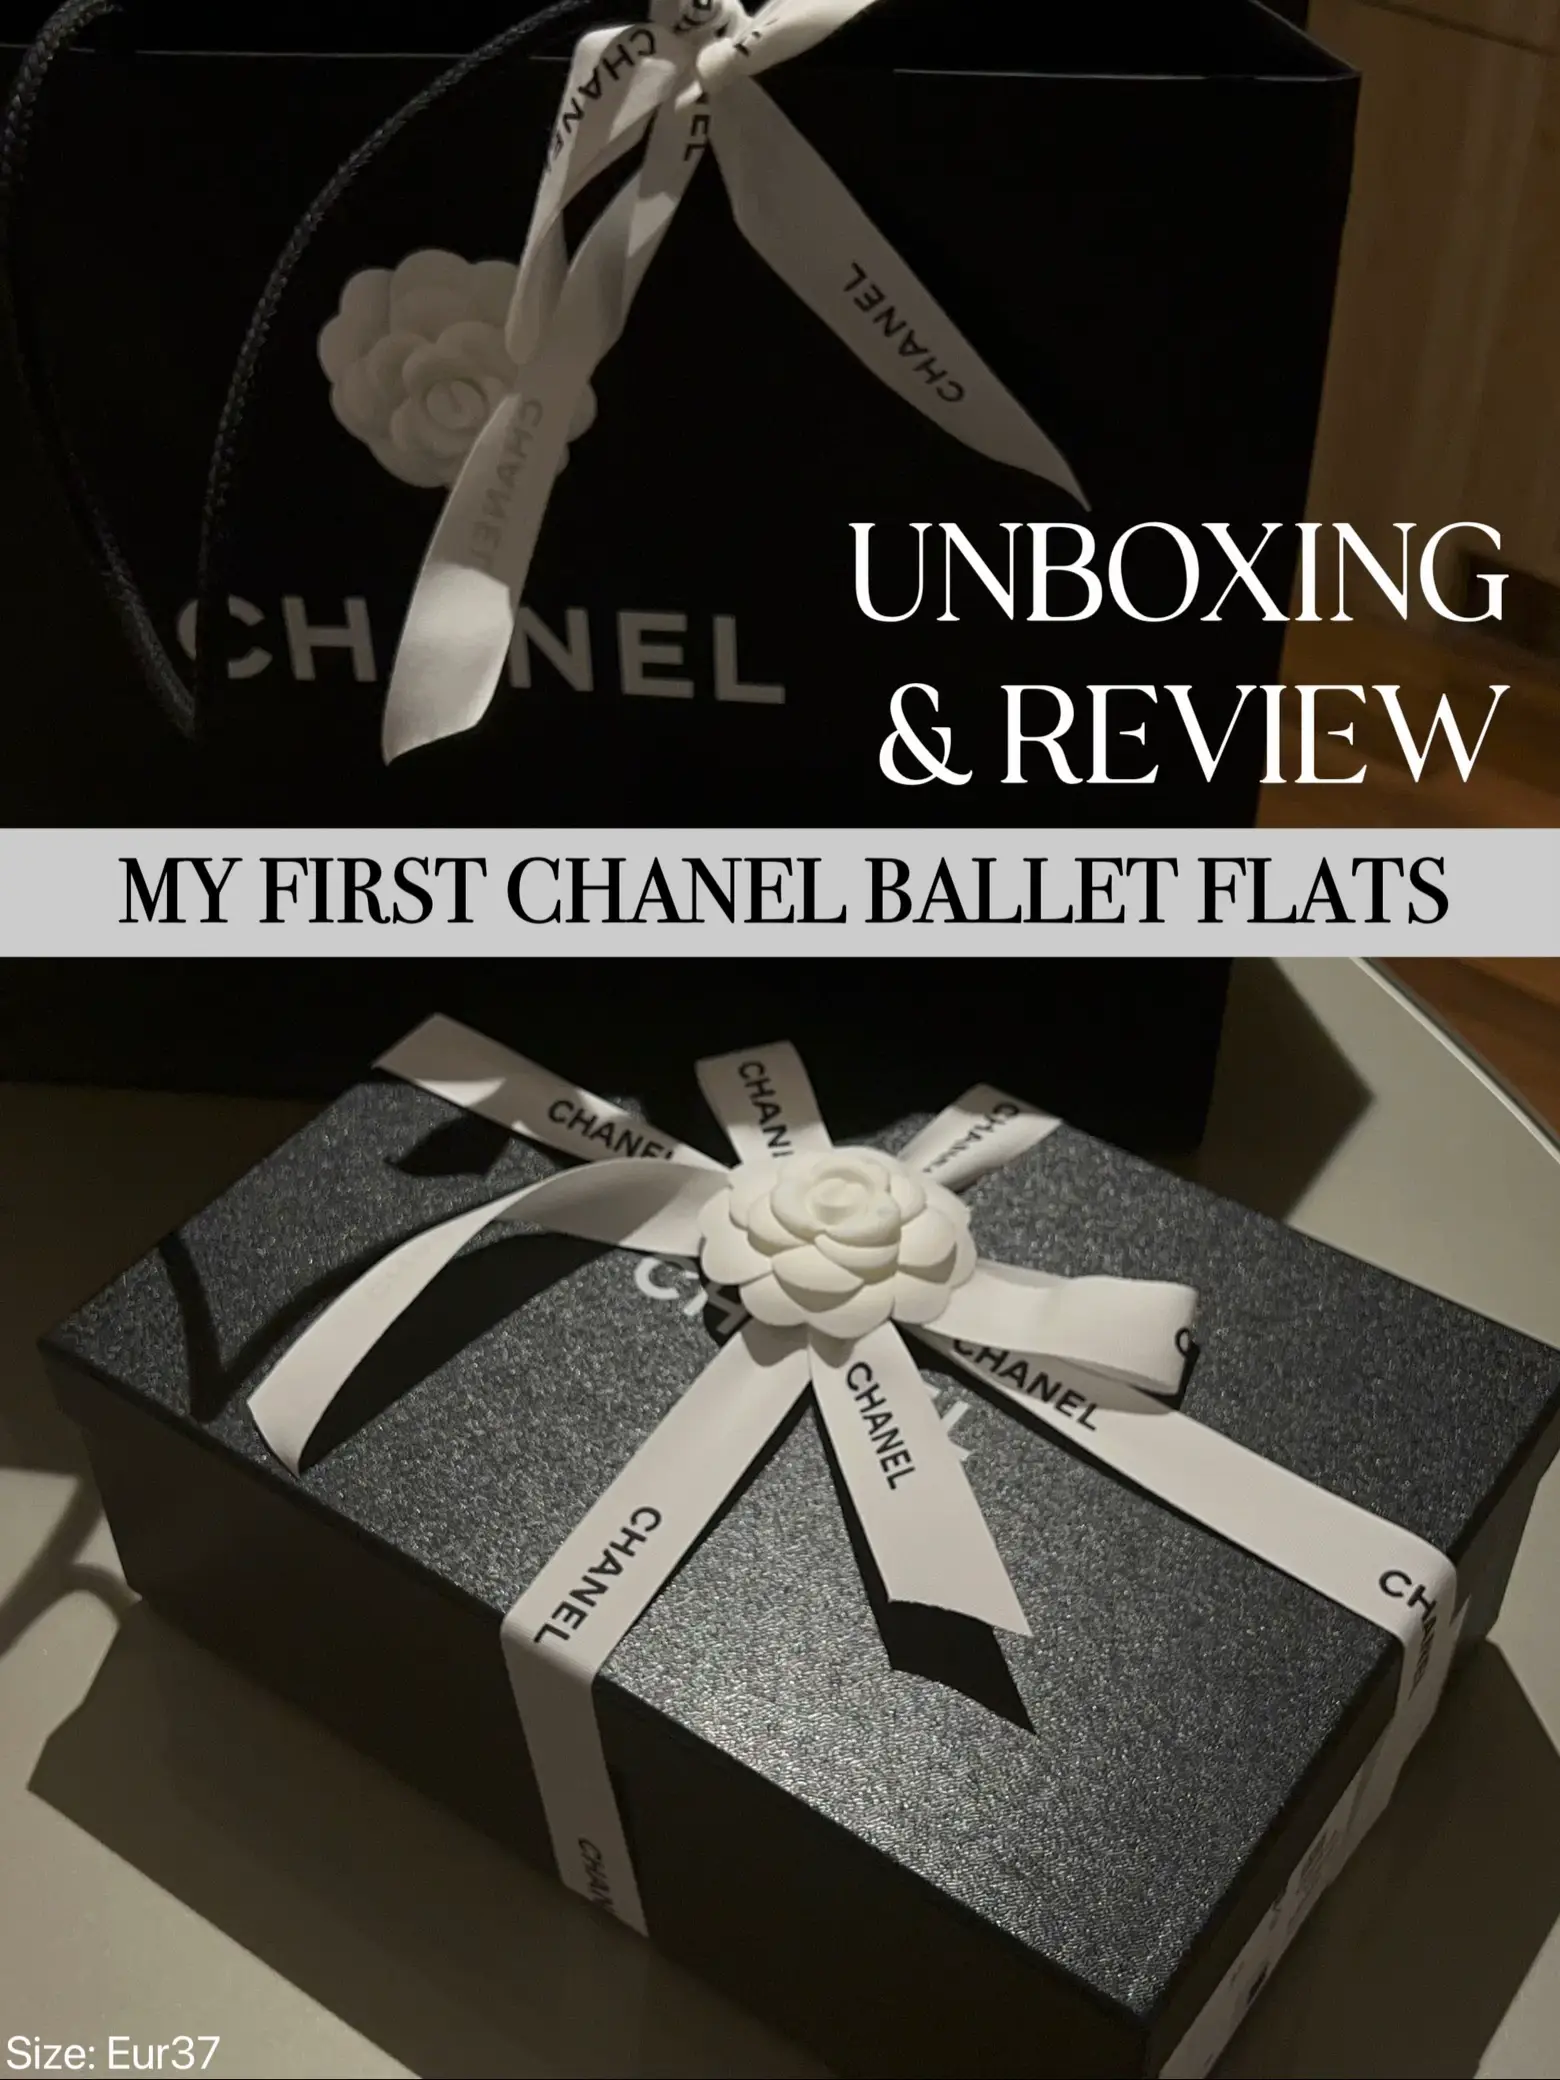 UNBOXING THE ICONIC CHANEL BALLET FLATS 🤍